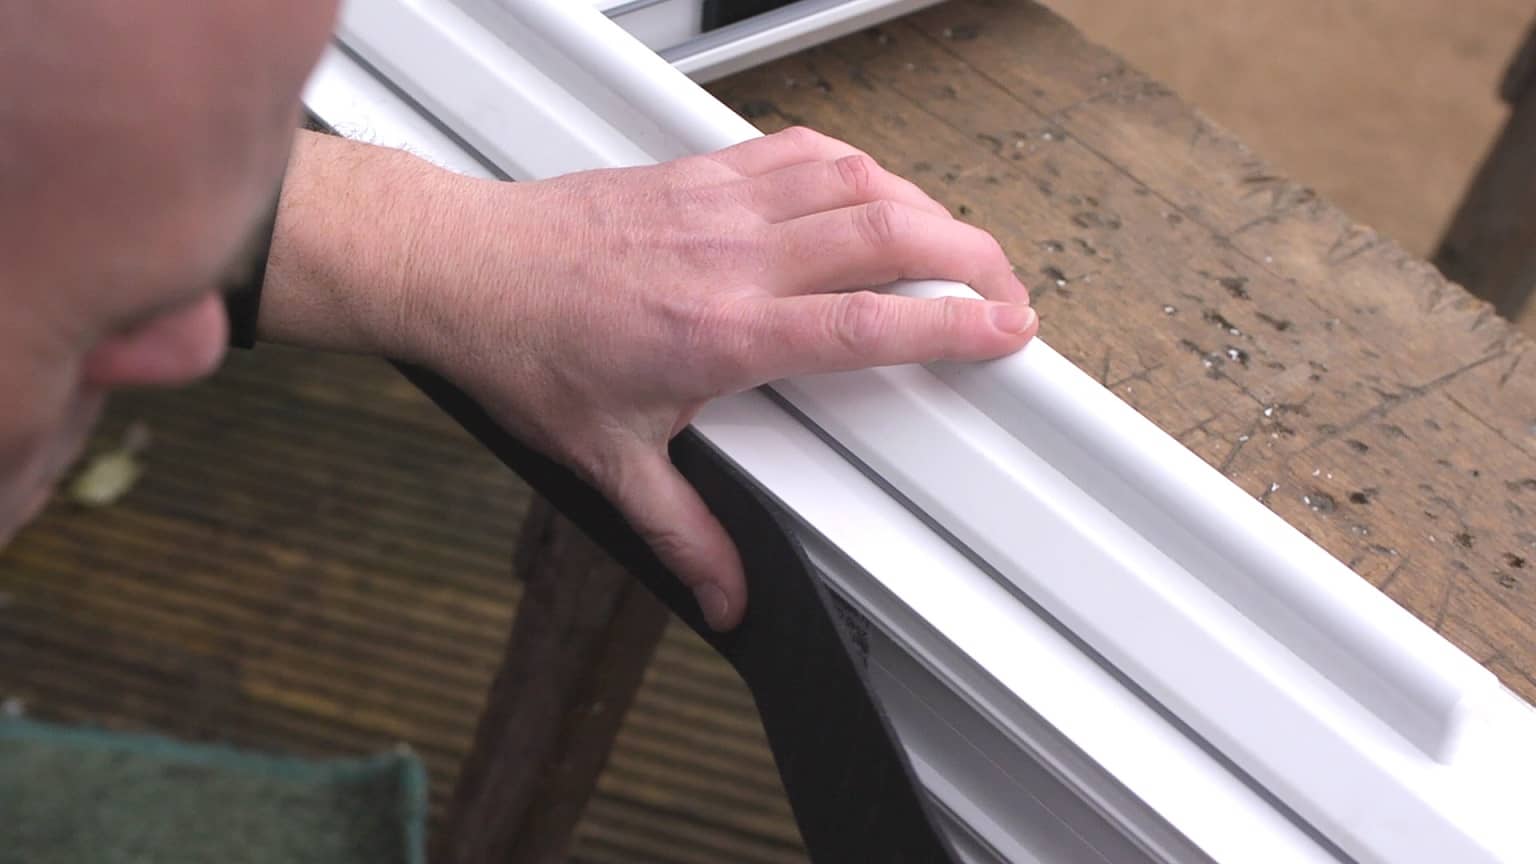 Installing fitting upvc window with Trufit installation tape